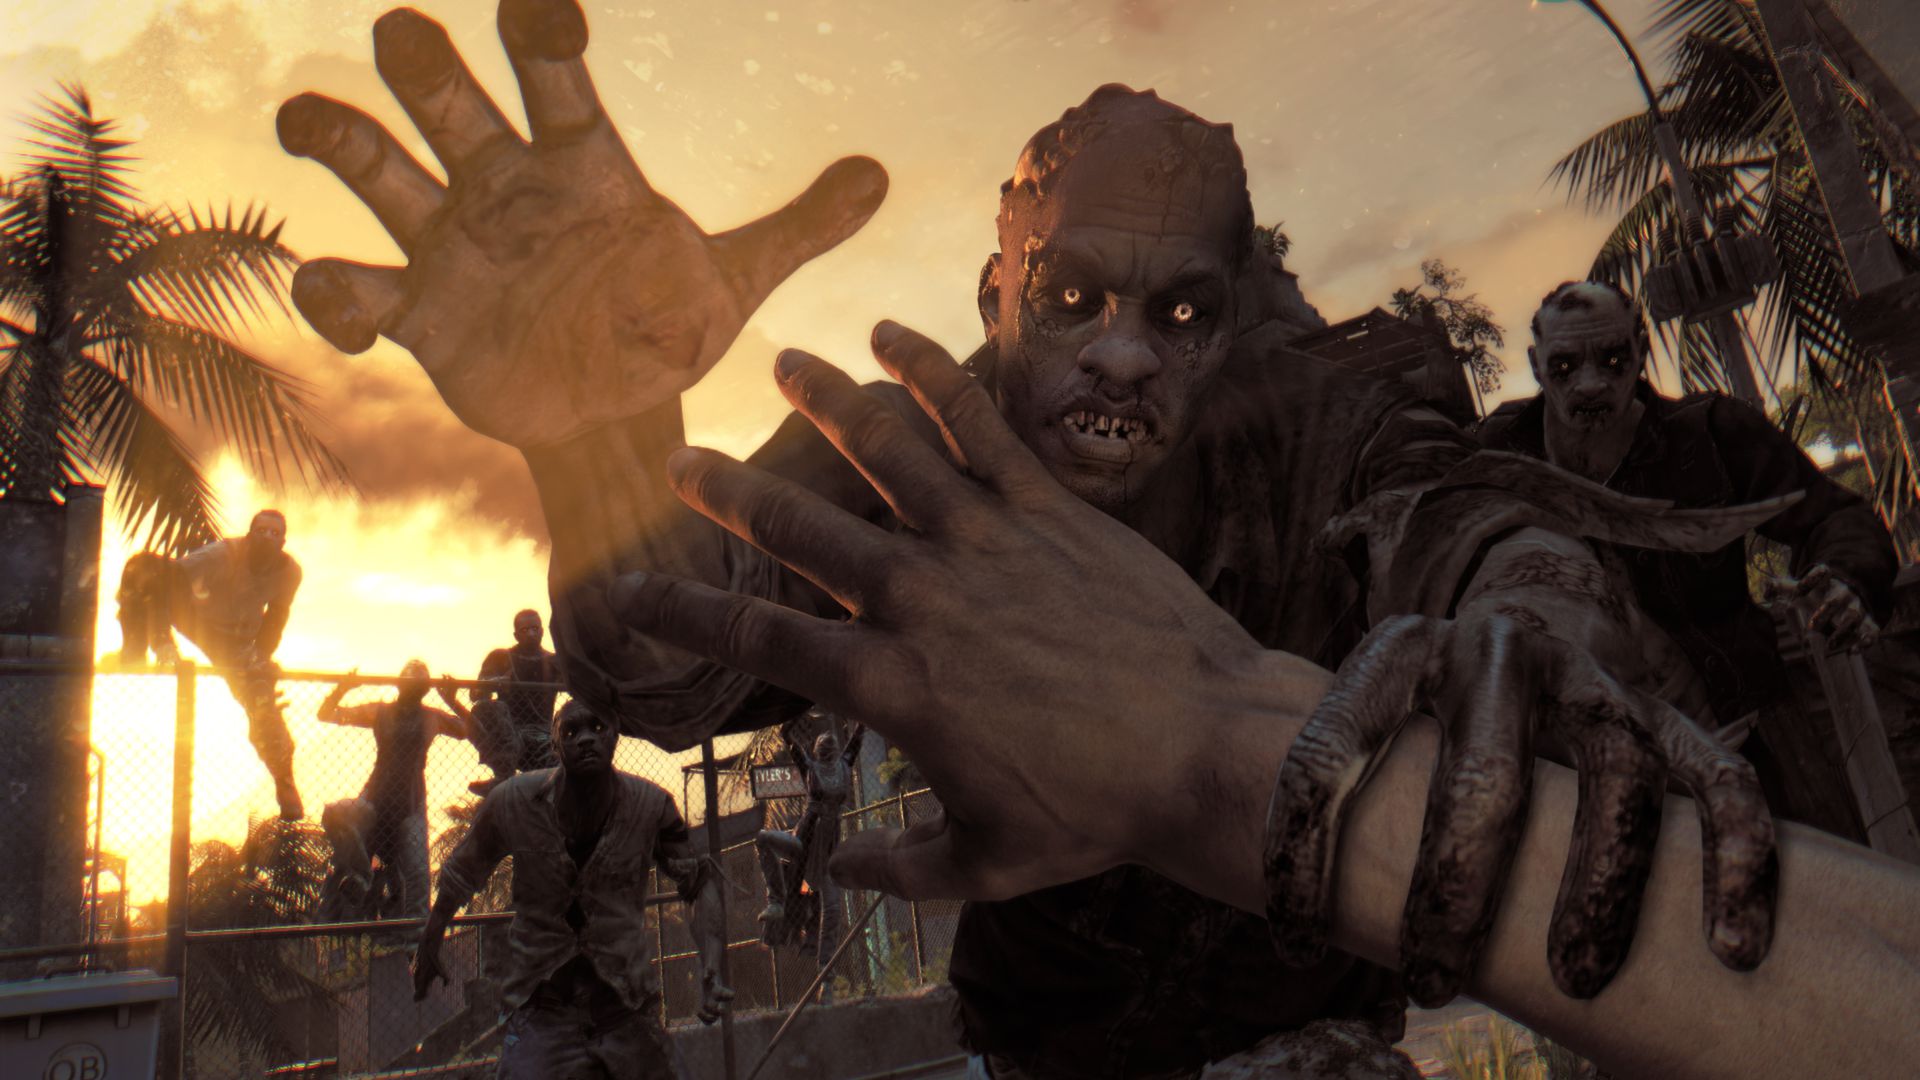 Final patch notes and Free Upgrade to Dying Light: Definitive